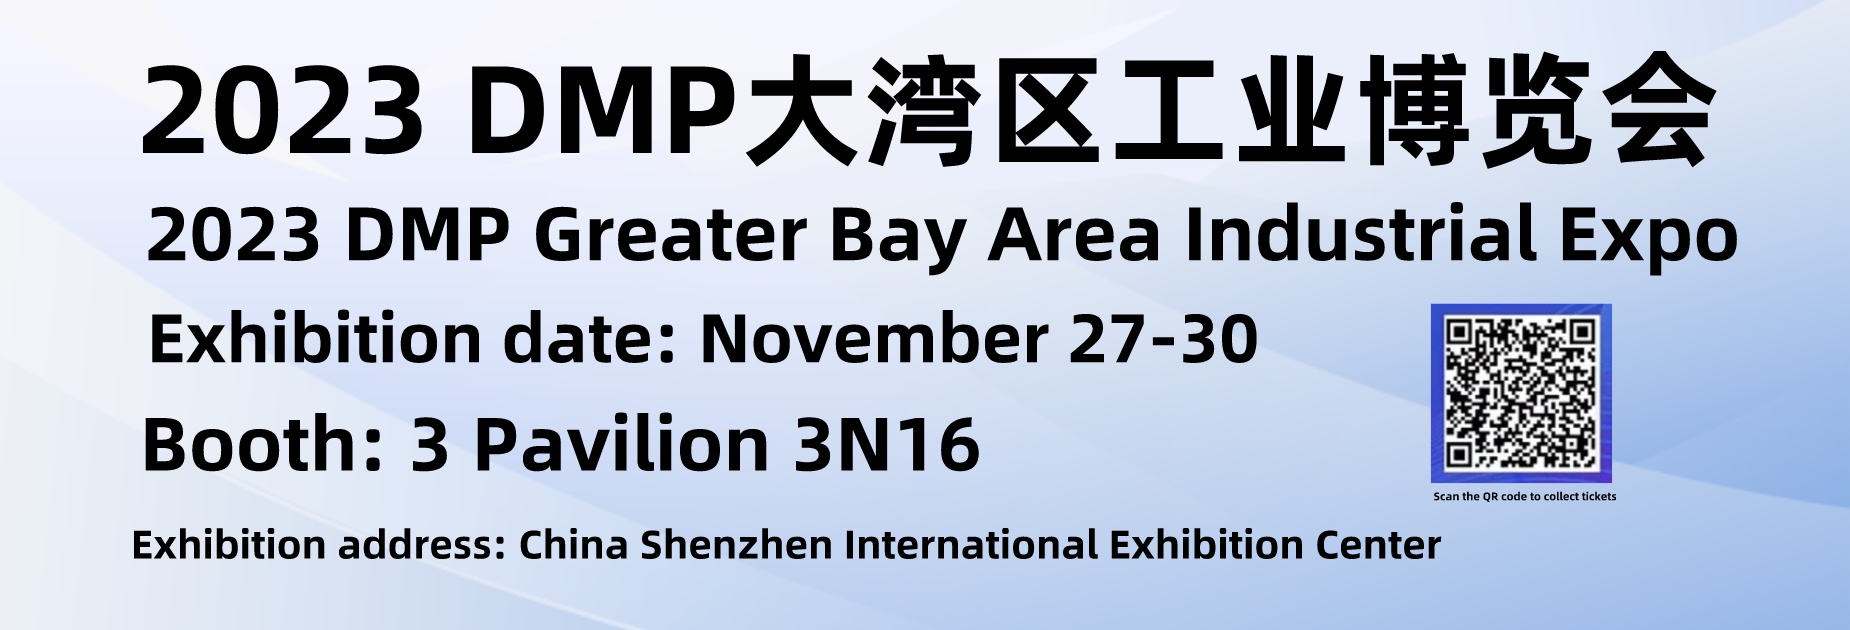 2023 DMP Greater Bay Area Industrial Expo